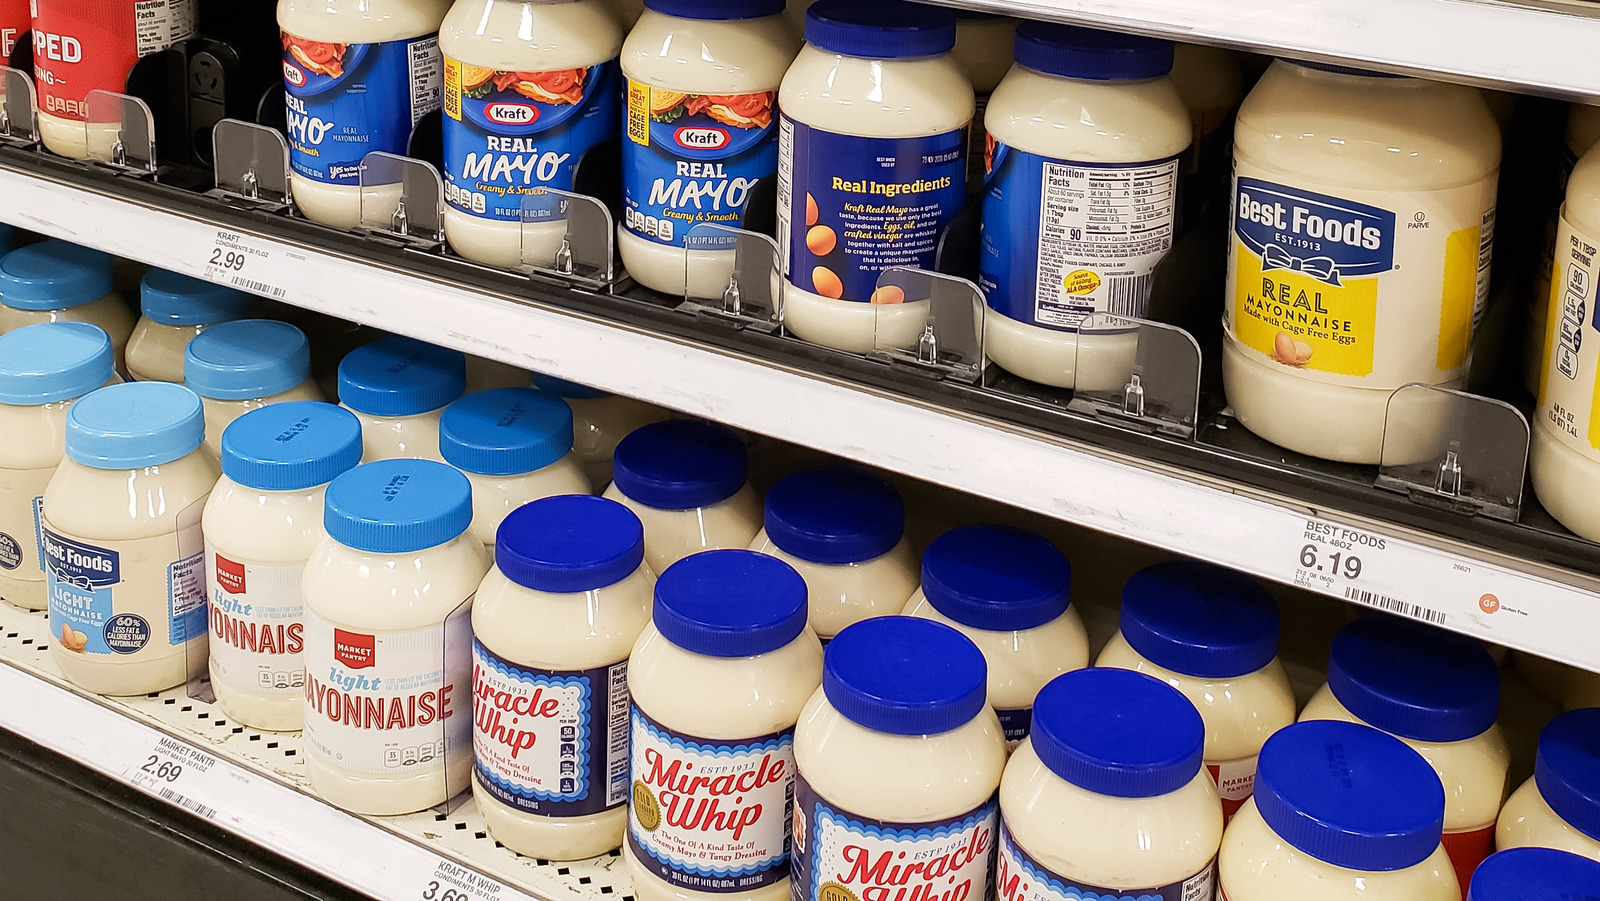 https://www.thedailymeal.com/img/gallery/what-makes-mayonnaise-and-miracle-whip-different/l-intro-1667487146.jpg